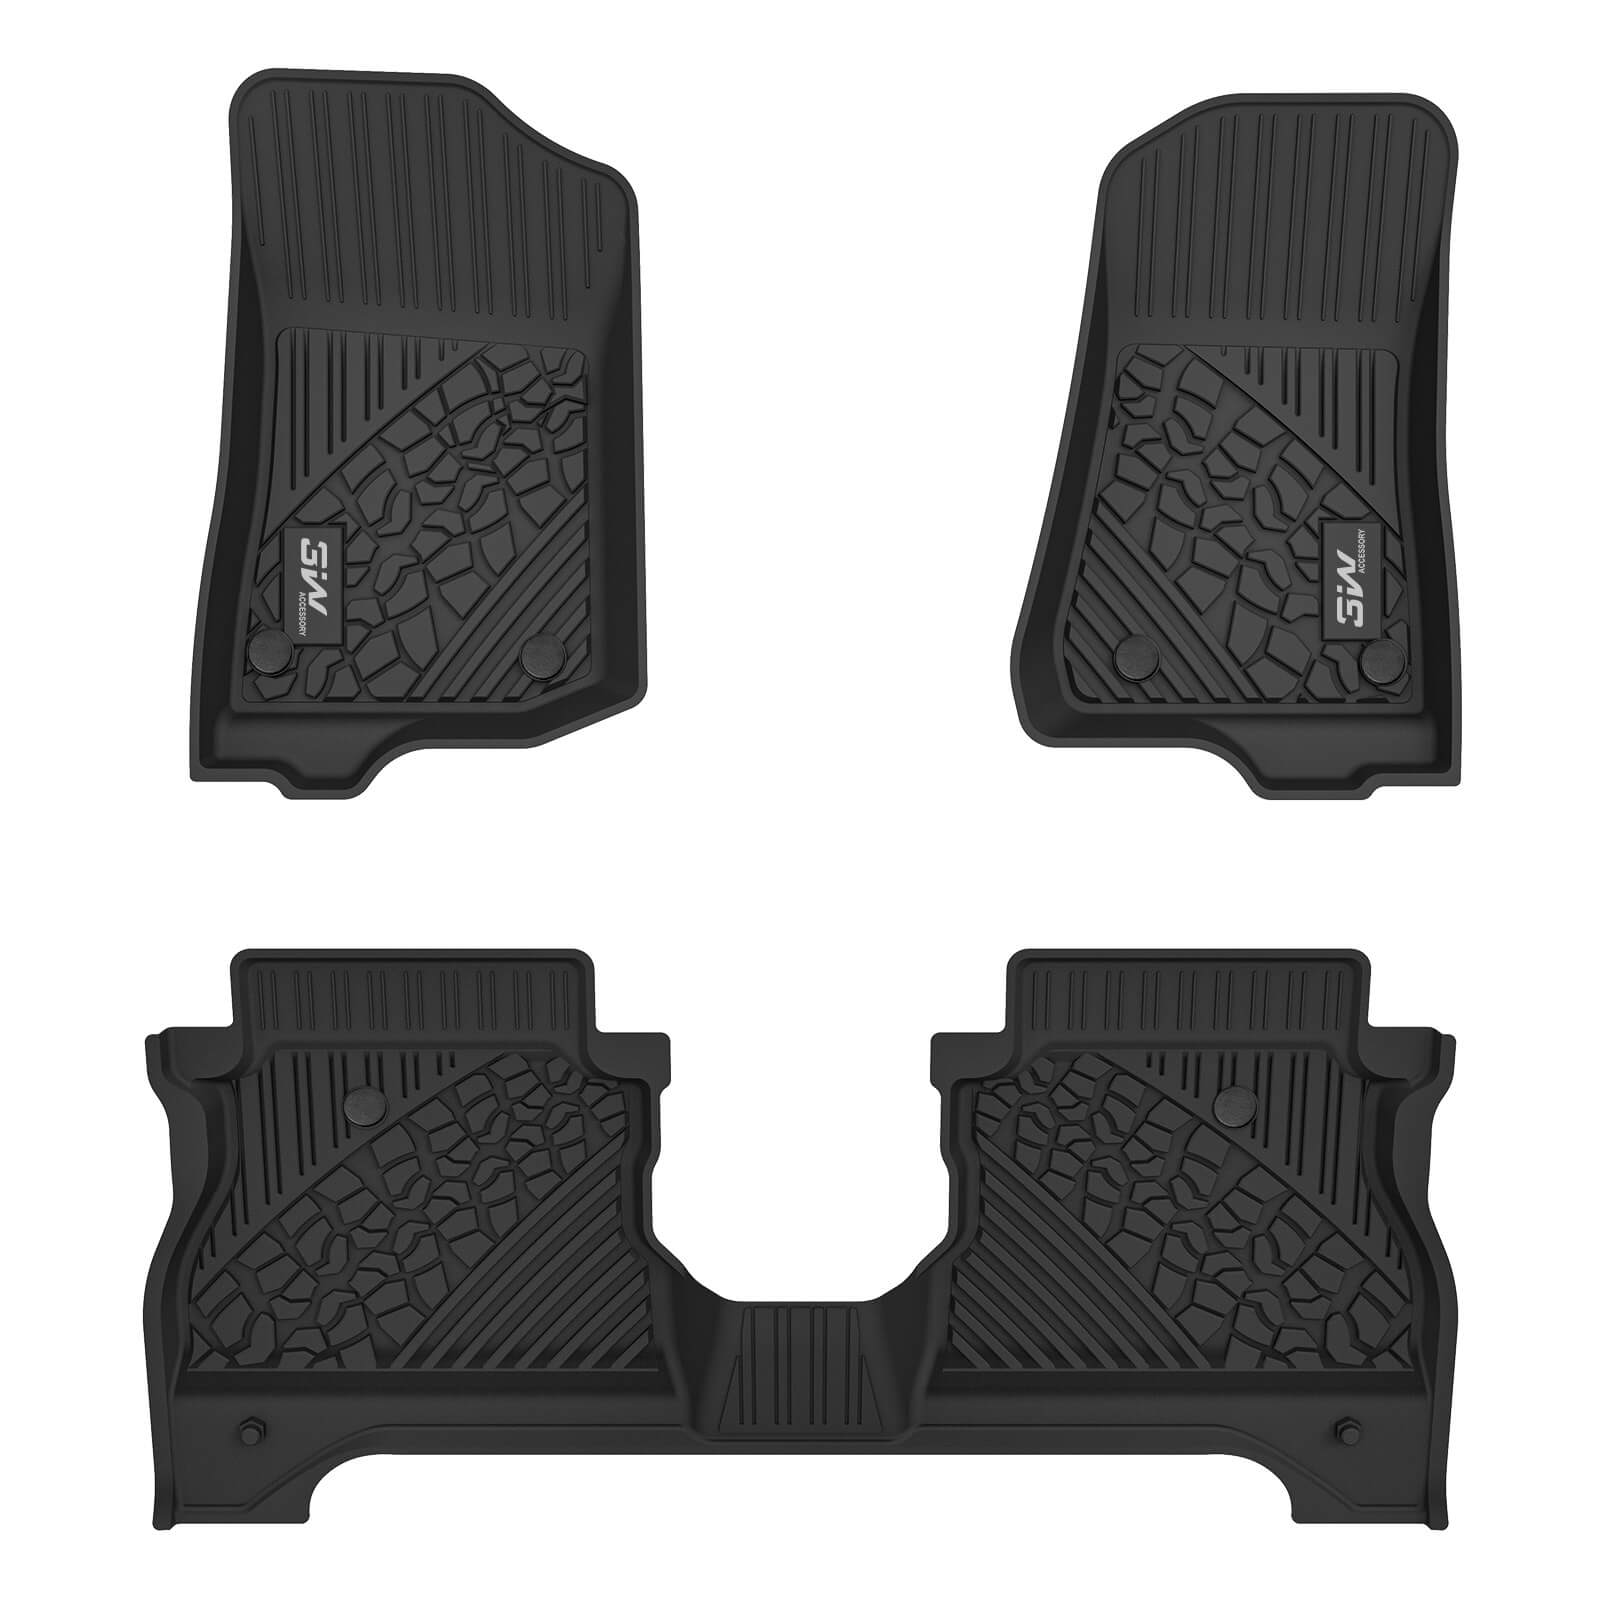 3W Jeep Gladiator 2020-2024 JT Custom Floor Mats TPE Material & All-Weather Protection Vehicles & Parts 3Wliners 2020-2024 Gladiator 2020-2024 1st&2nd Row Mats with White Logo